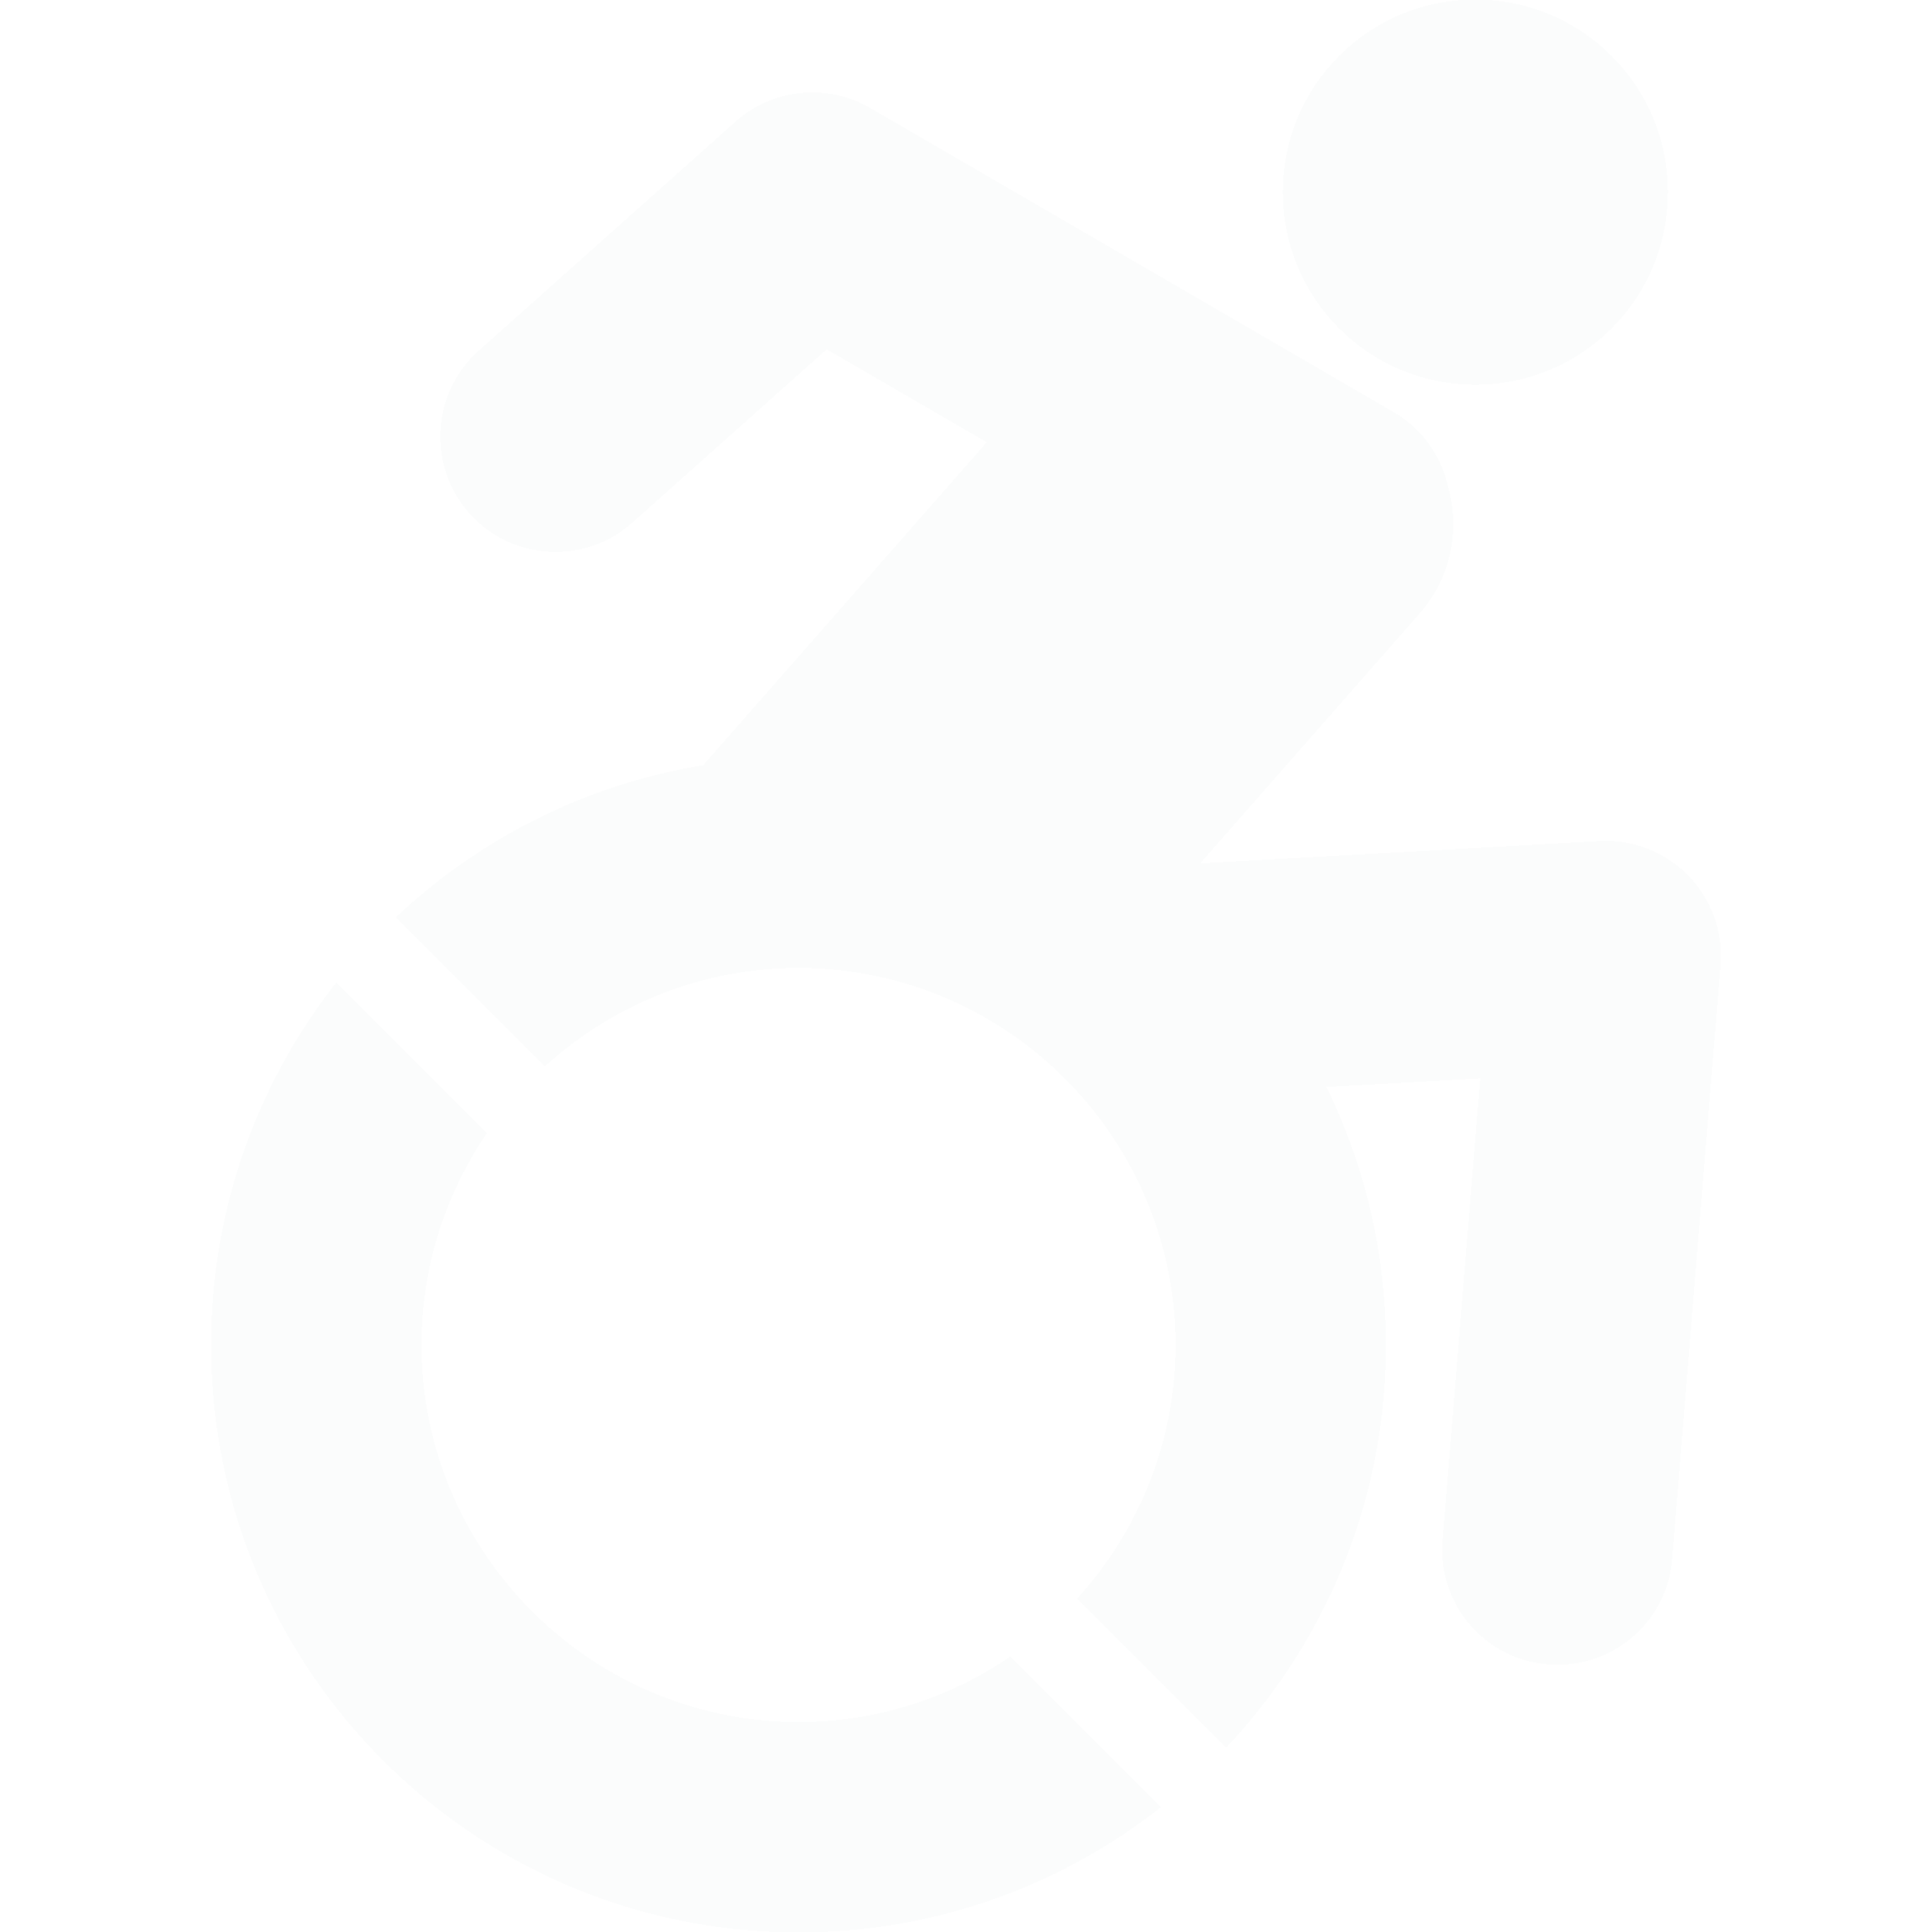 Wheelchair symbol, accessibility mode